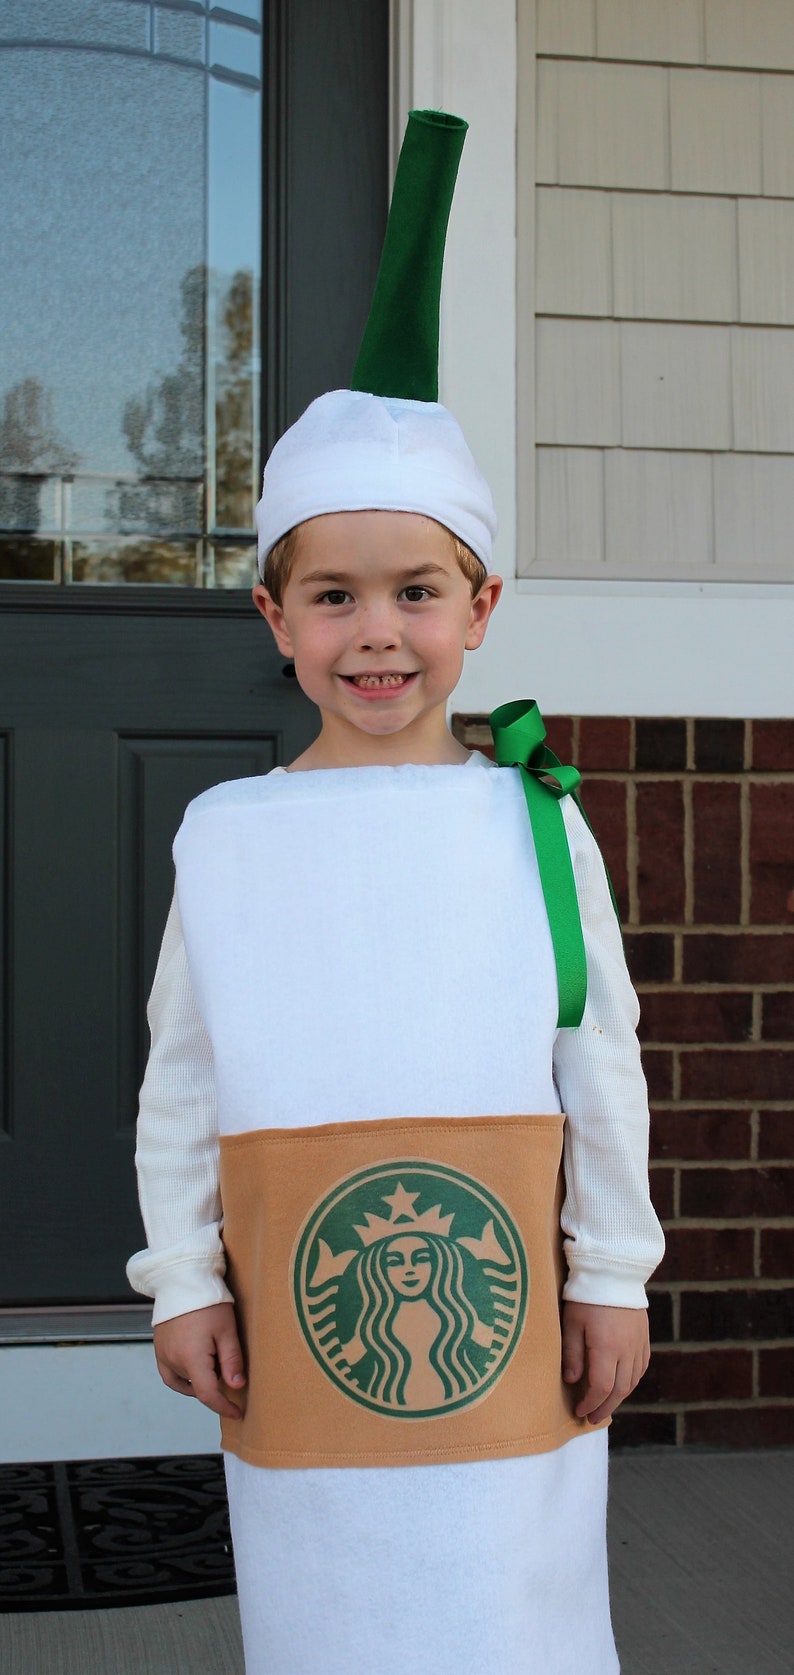 halloween-coffee-cup-costume-with-cup-sleeve-starbucks-logo-3-etsy